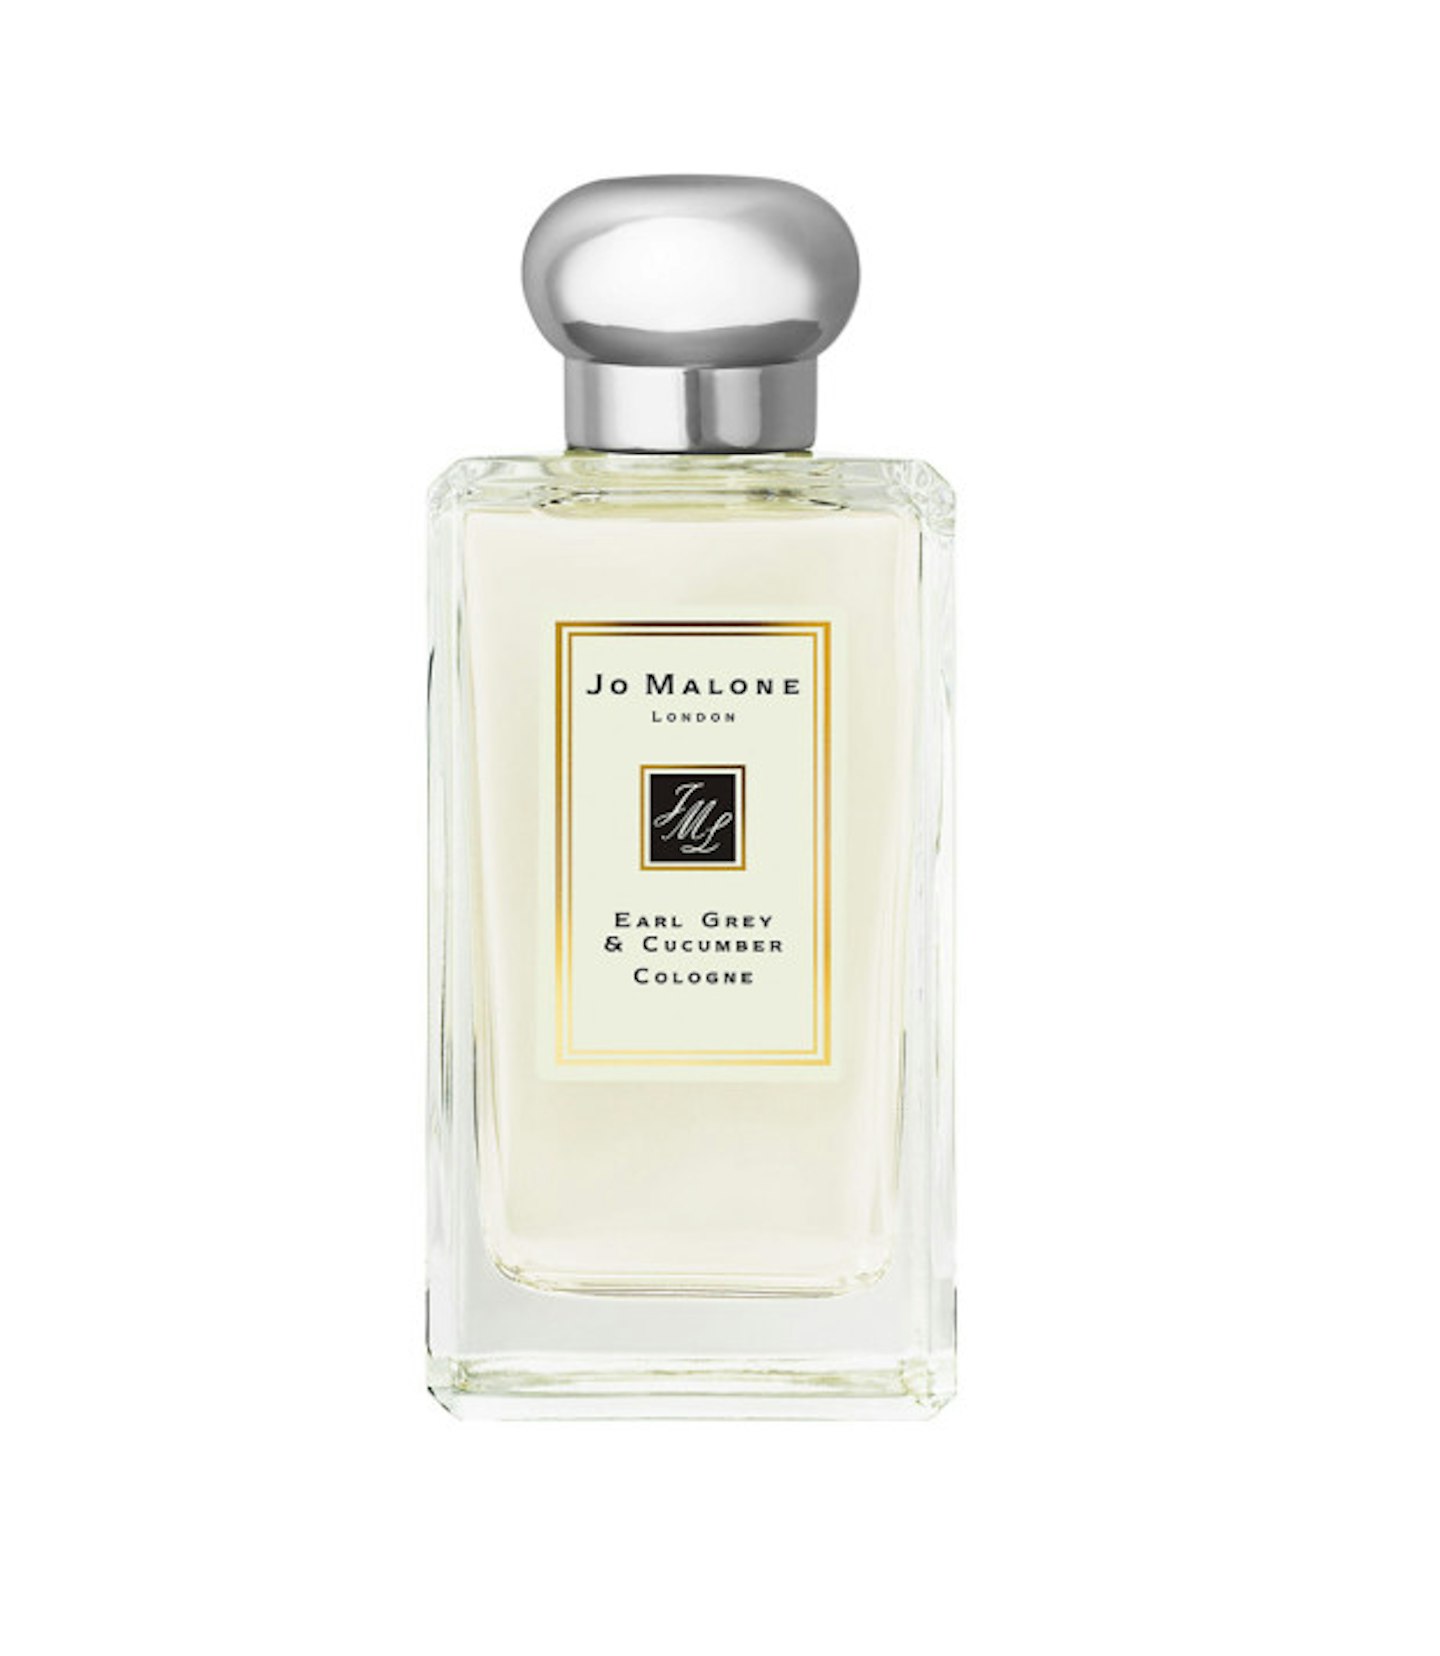 fifty-shades-of-grey-shopping-jo-malone-earl-grey-cucumber-cologne